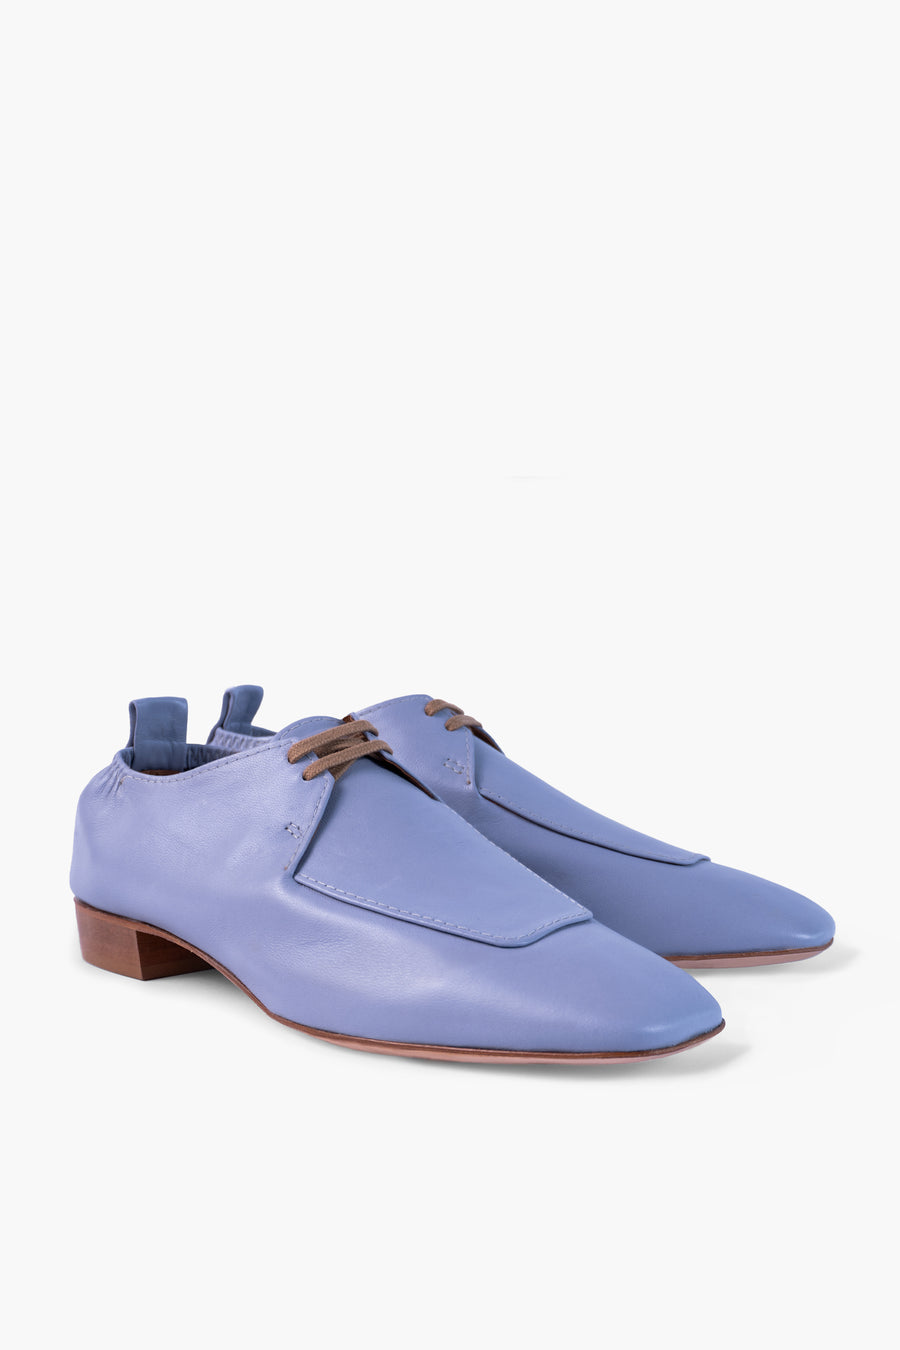 Sustainable, lilac coloured Teda shoe, locally produced in Hamburg. Made from metal-free leather. Made in Germany by Alina Schürfeld.